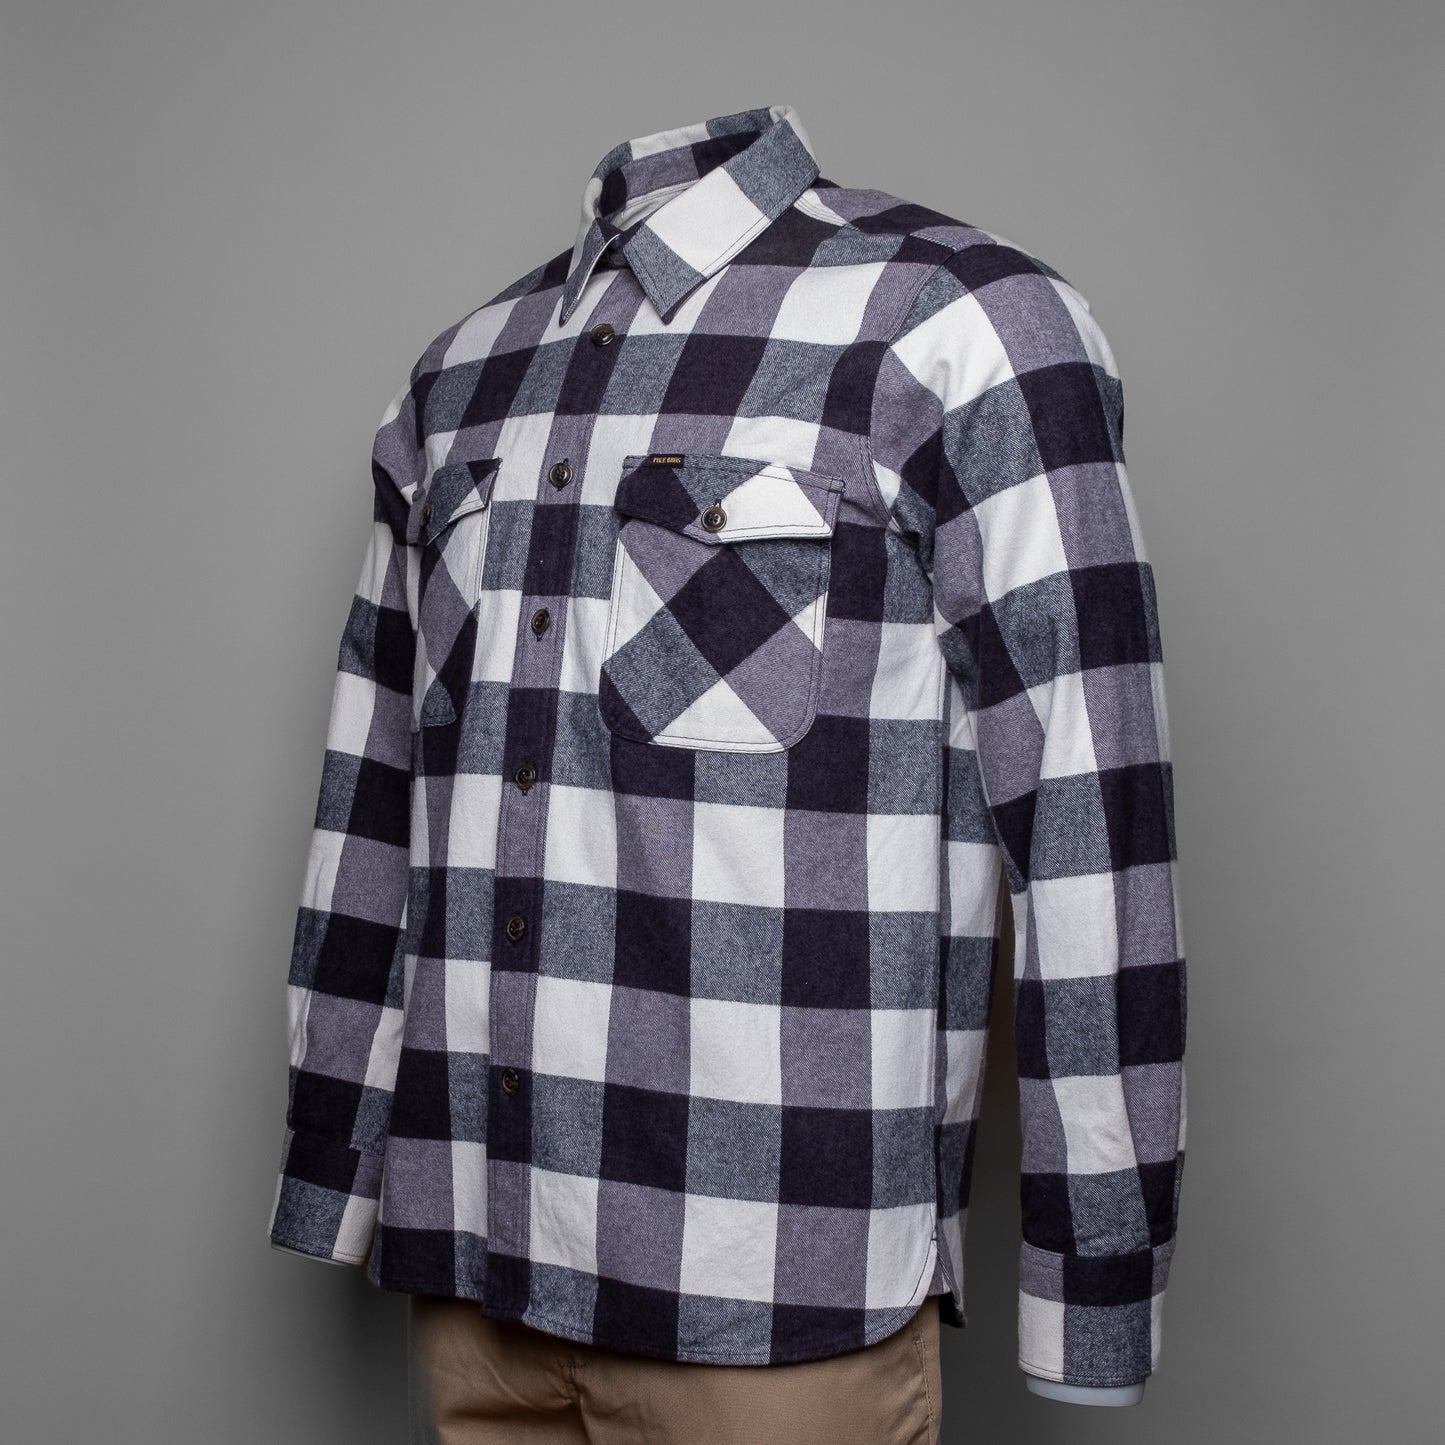 PIKE BROTHERS - 1943 CPO SHIRT